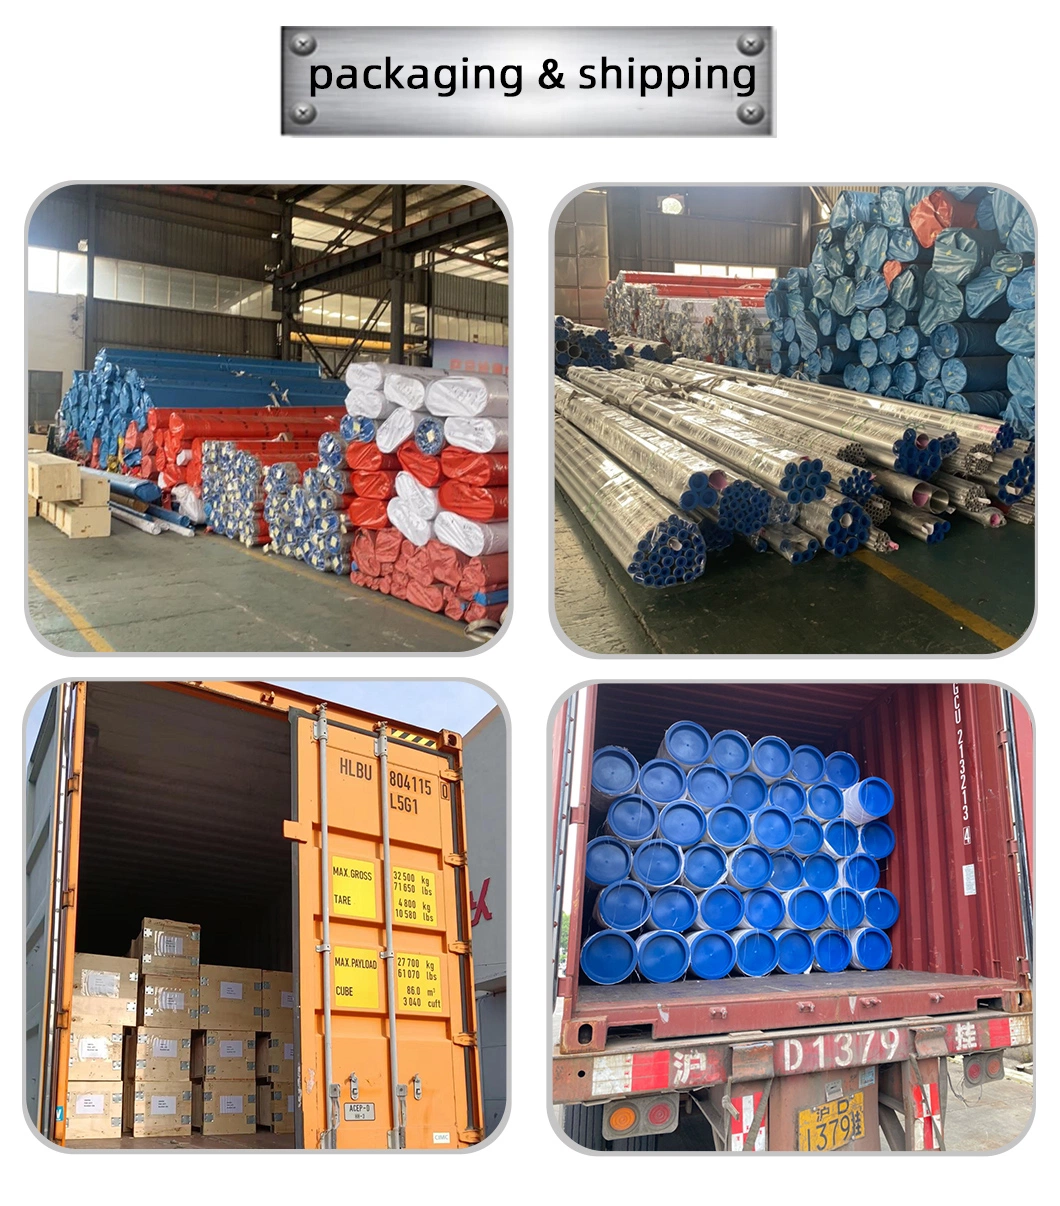 Stainless Steel Pipe 304 304L 304h 316 316L 316h 321 321H 317L 347 347H 310S 310 310h Stainless Steel Seamless Pipe Chemical Pipe Supplier